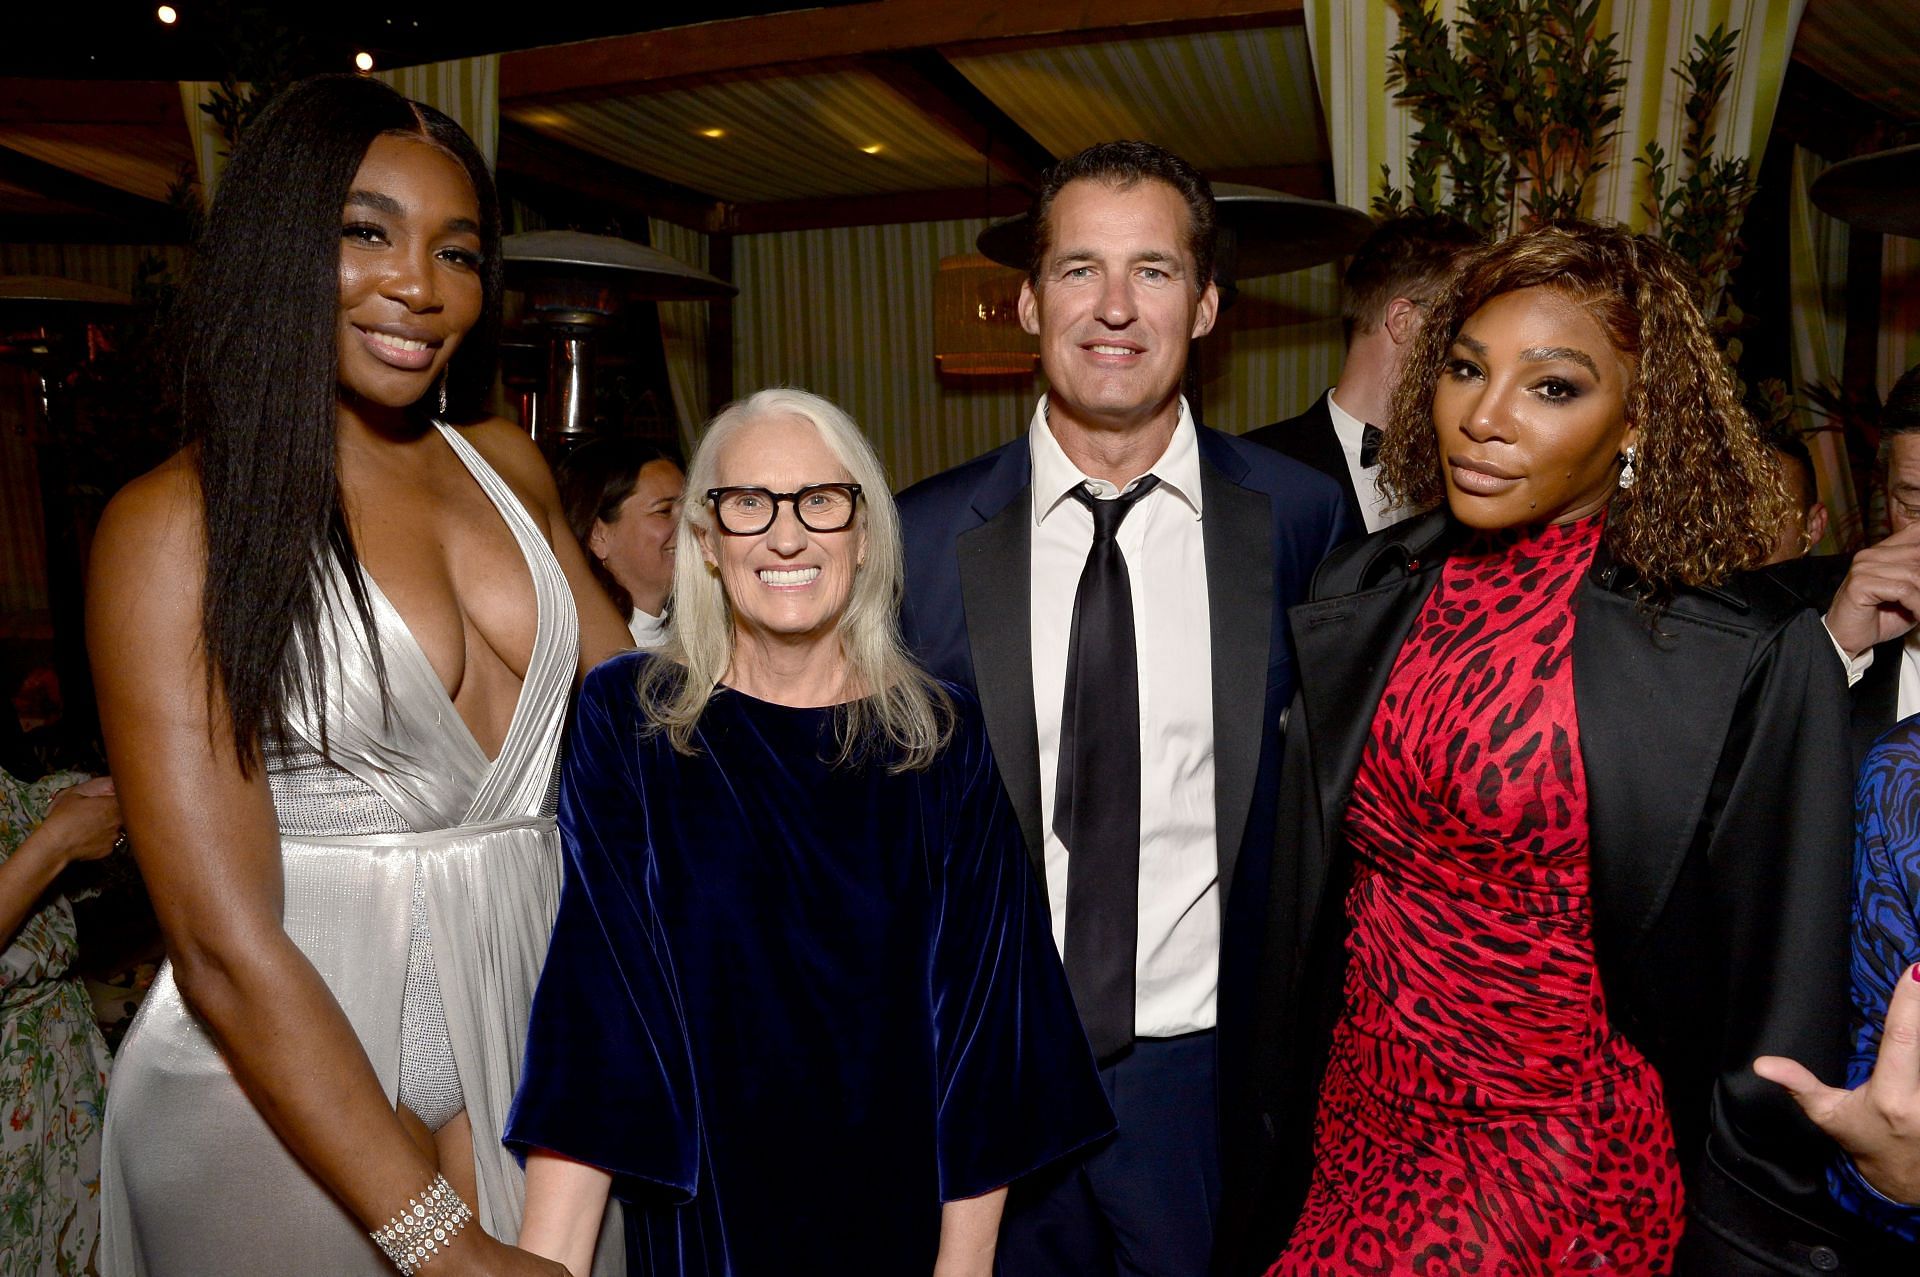 Venus and Serena Williams could collect only one Academy Award as Executive Producers